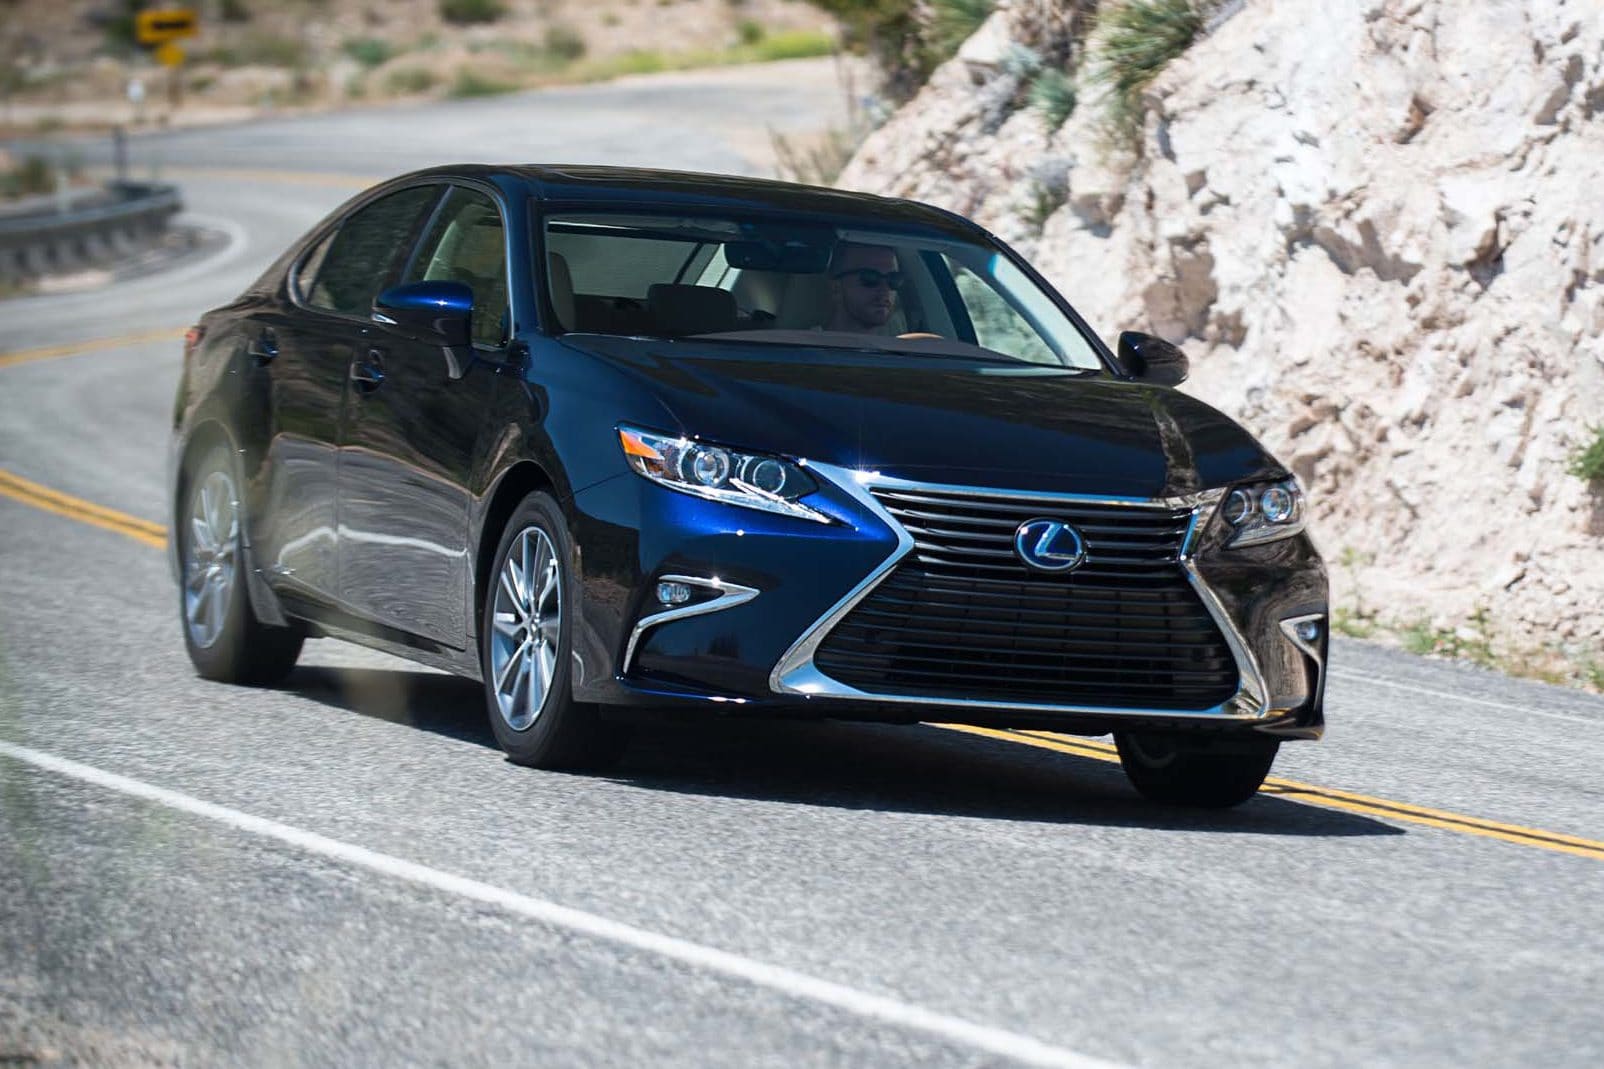 2017 Lexus ES 300h Hybrid First Test Review: Quicker, But Is It Better?